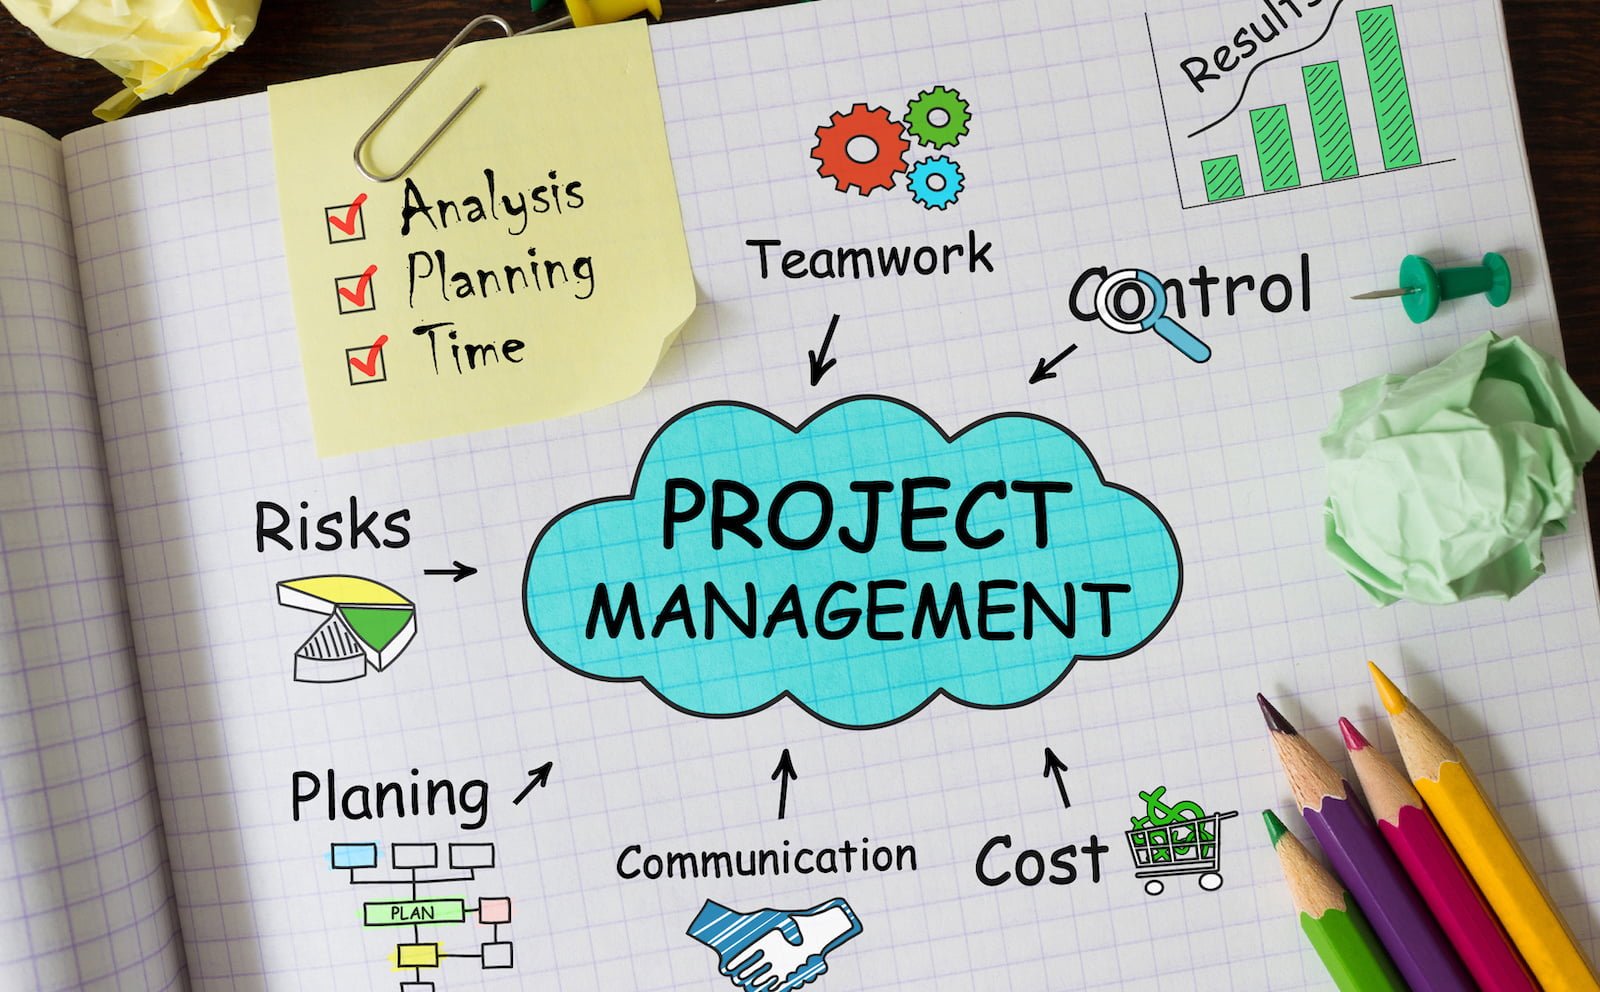 Project Management Assignments: Tips For Managing Time